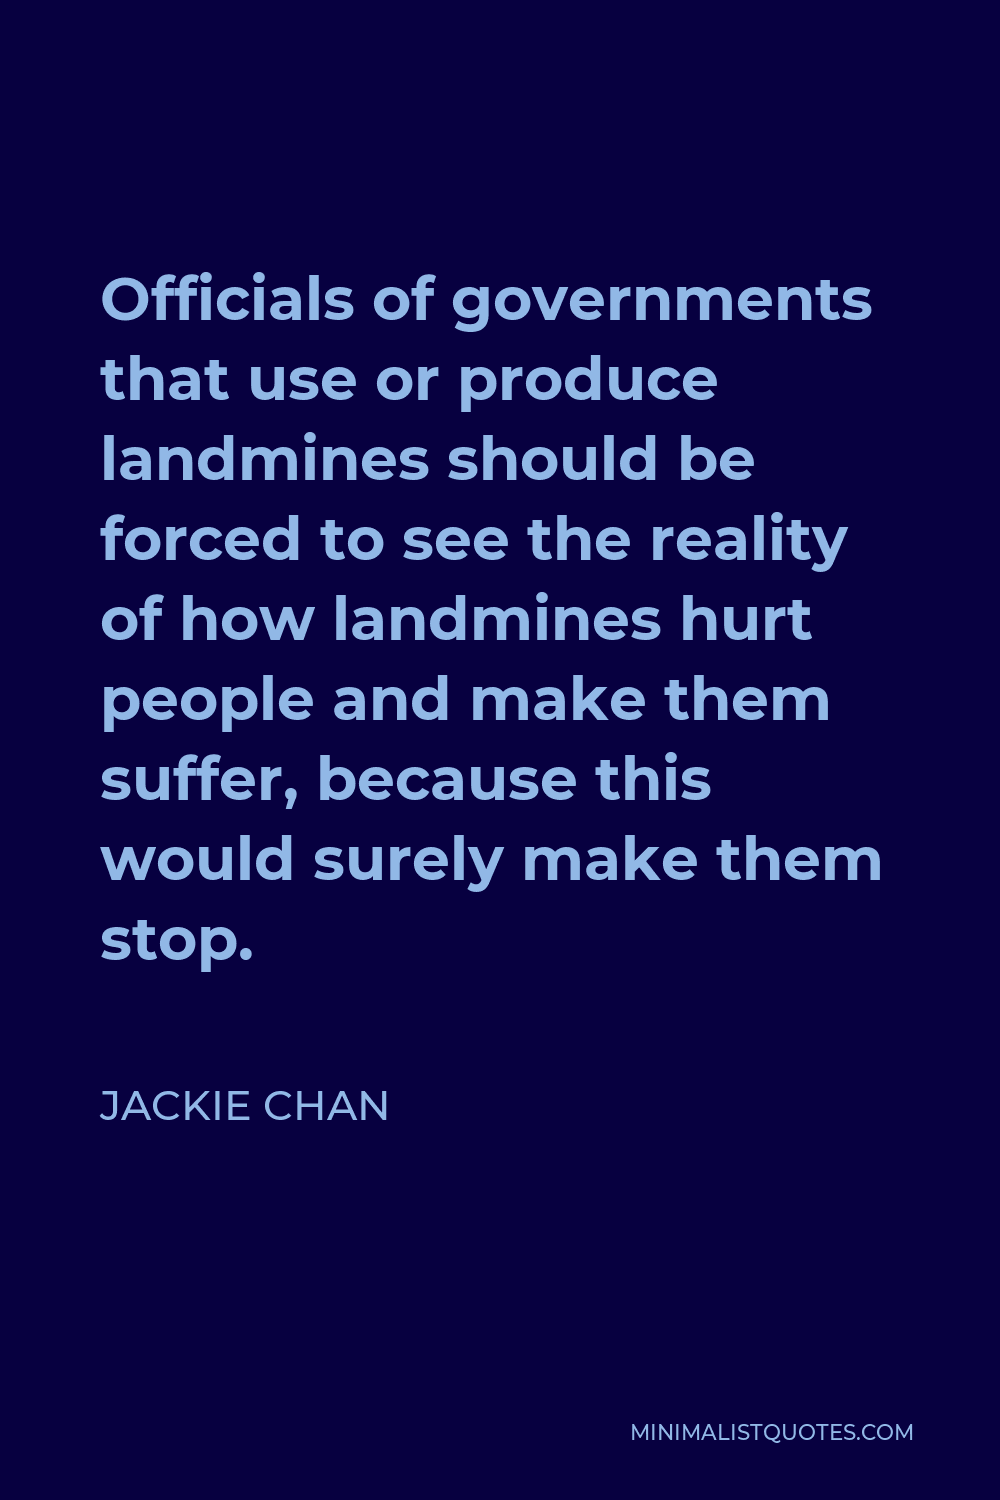 Jackie Chan Quote - Officials of governments that use or produce landmines should be forced to see the reality of how landmines hurt people and make them suffer, because this would surely make them stop.